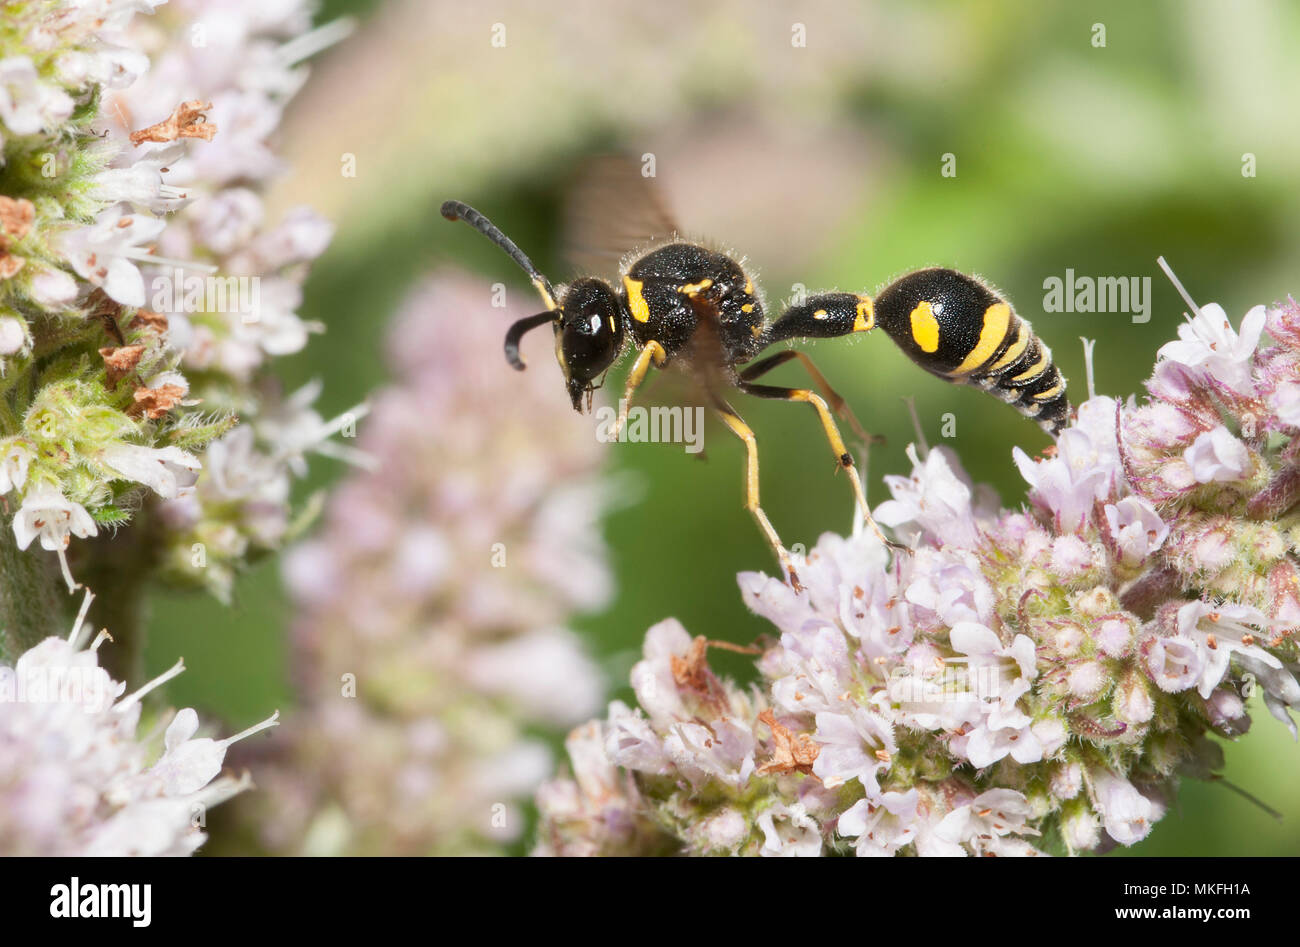 Potter wasp (Eumenes papillarius) male on Mint flowers, Regional Natural Park of Northern Vosges, France Stock Photo